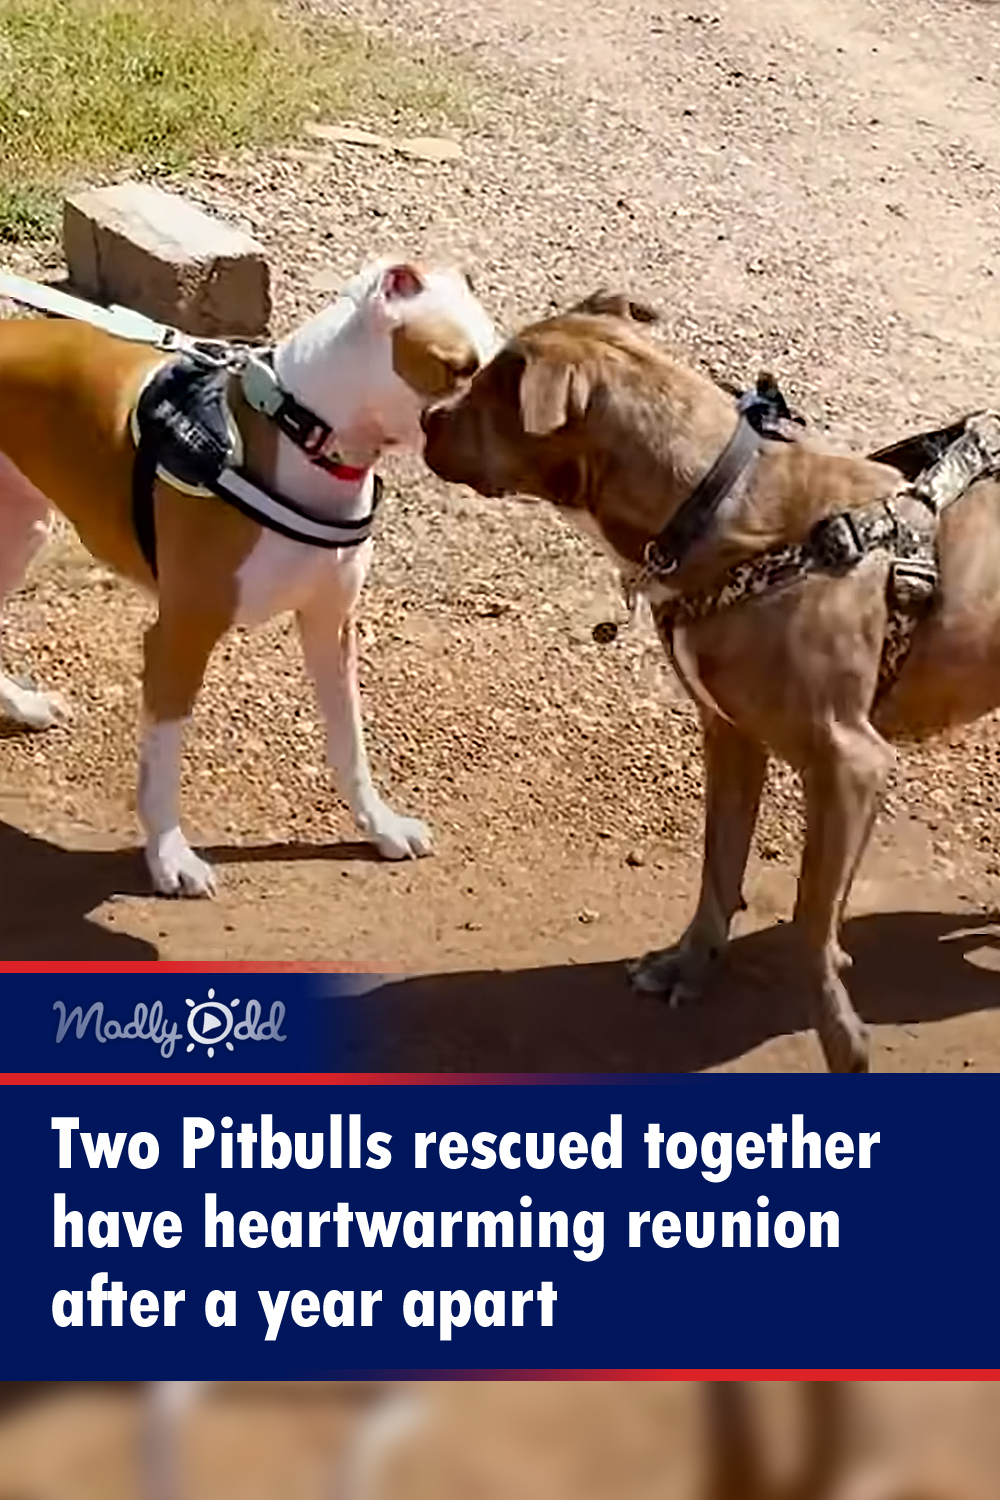 Two Pitbulls rescued together get reunited after a year apart